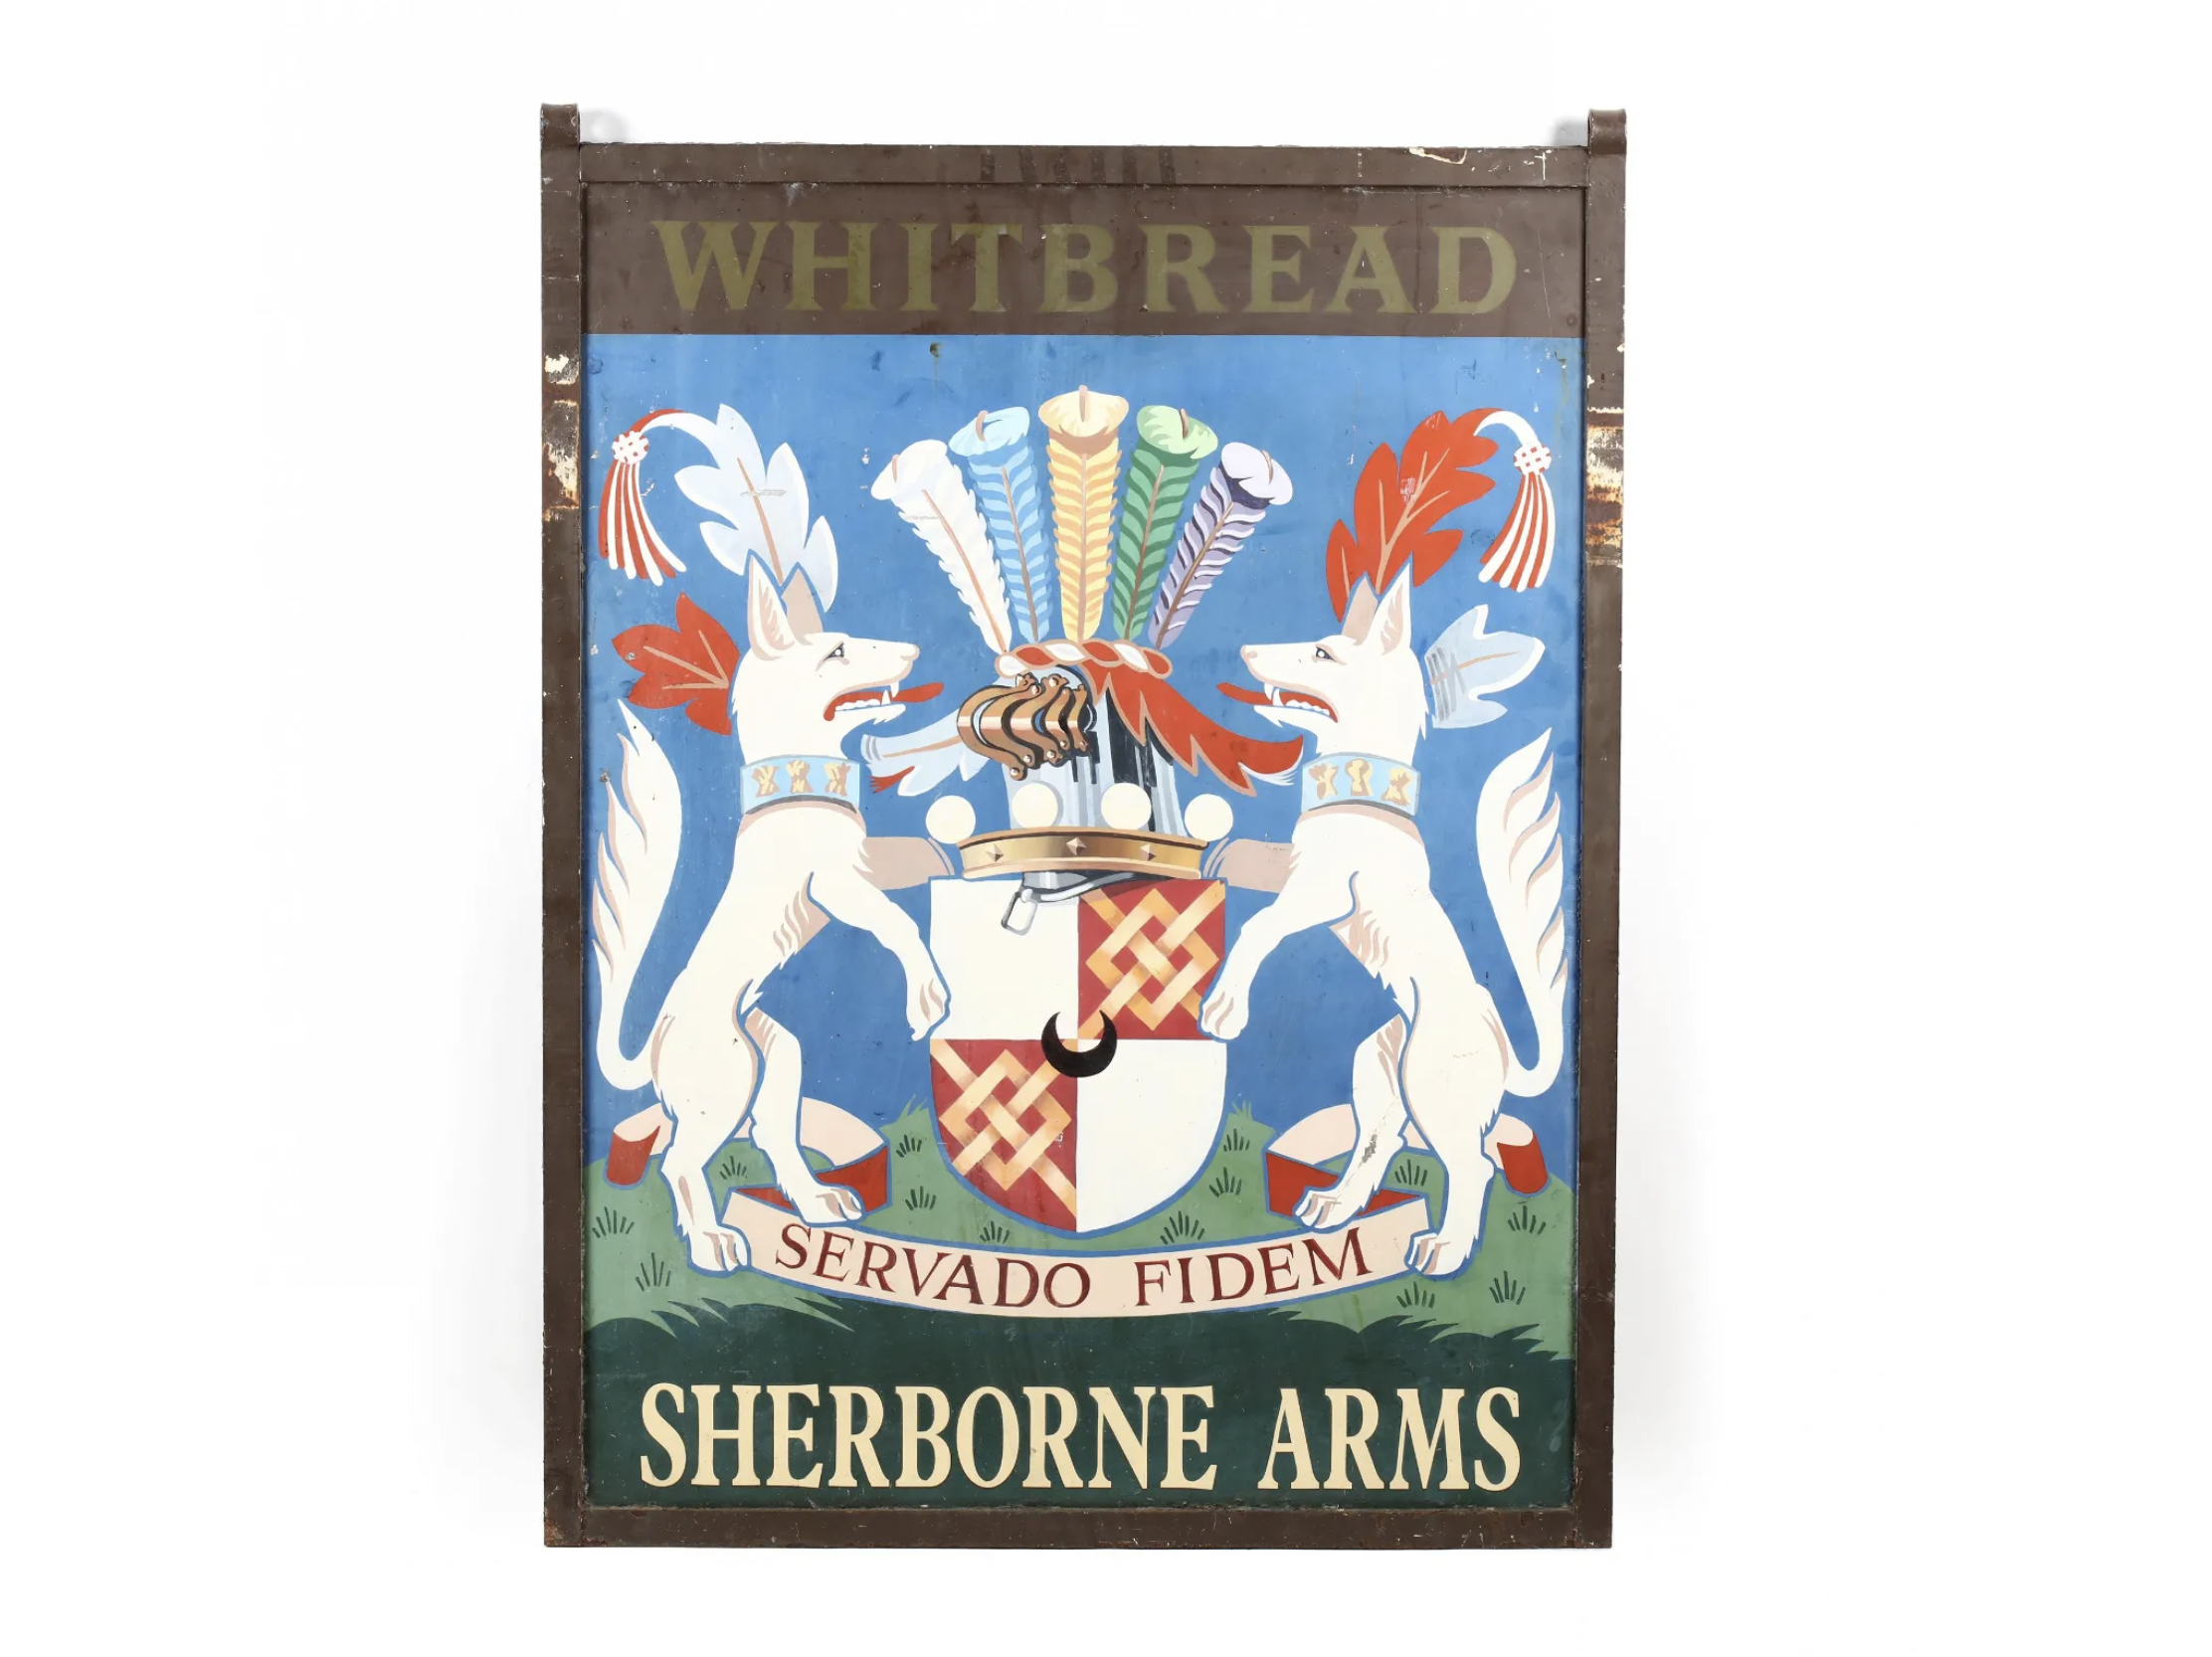 A late 20th-century hand-painted double-sided metal pub sign for the Sherborne Arms in Whitbread earned $1,150 plus the buyer’s premium in April 2020. Image courtesy of Leland Little Auctions and LiveAuctioneers